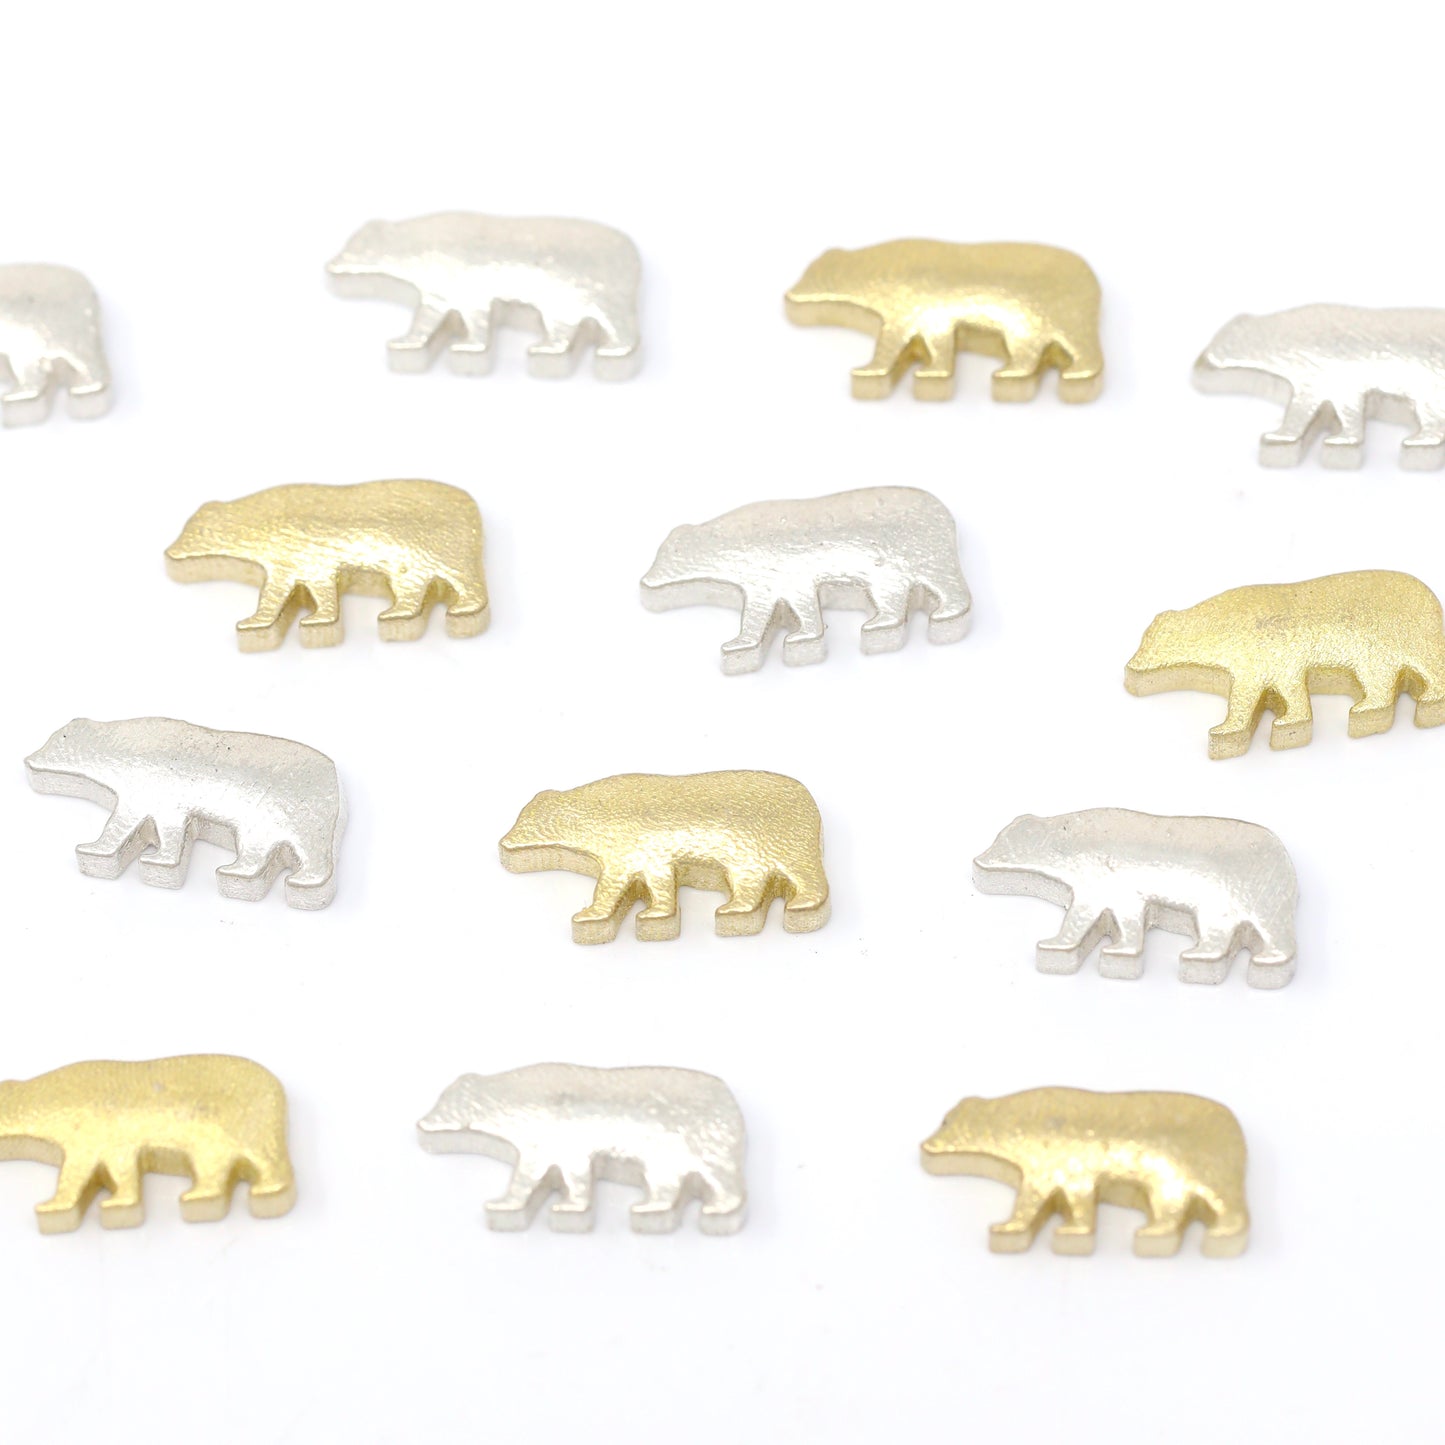 SALE Mama Bear Accent Charm Embellishments for Soldering or Jewelry Making